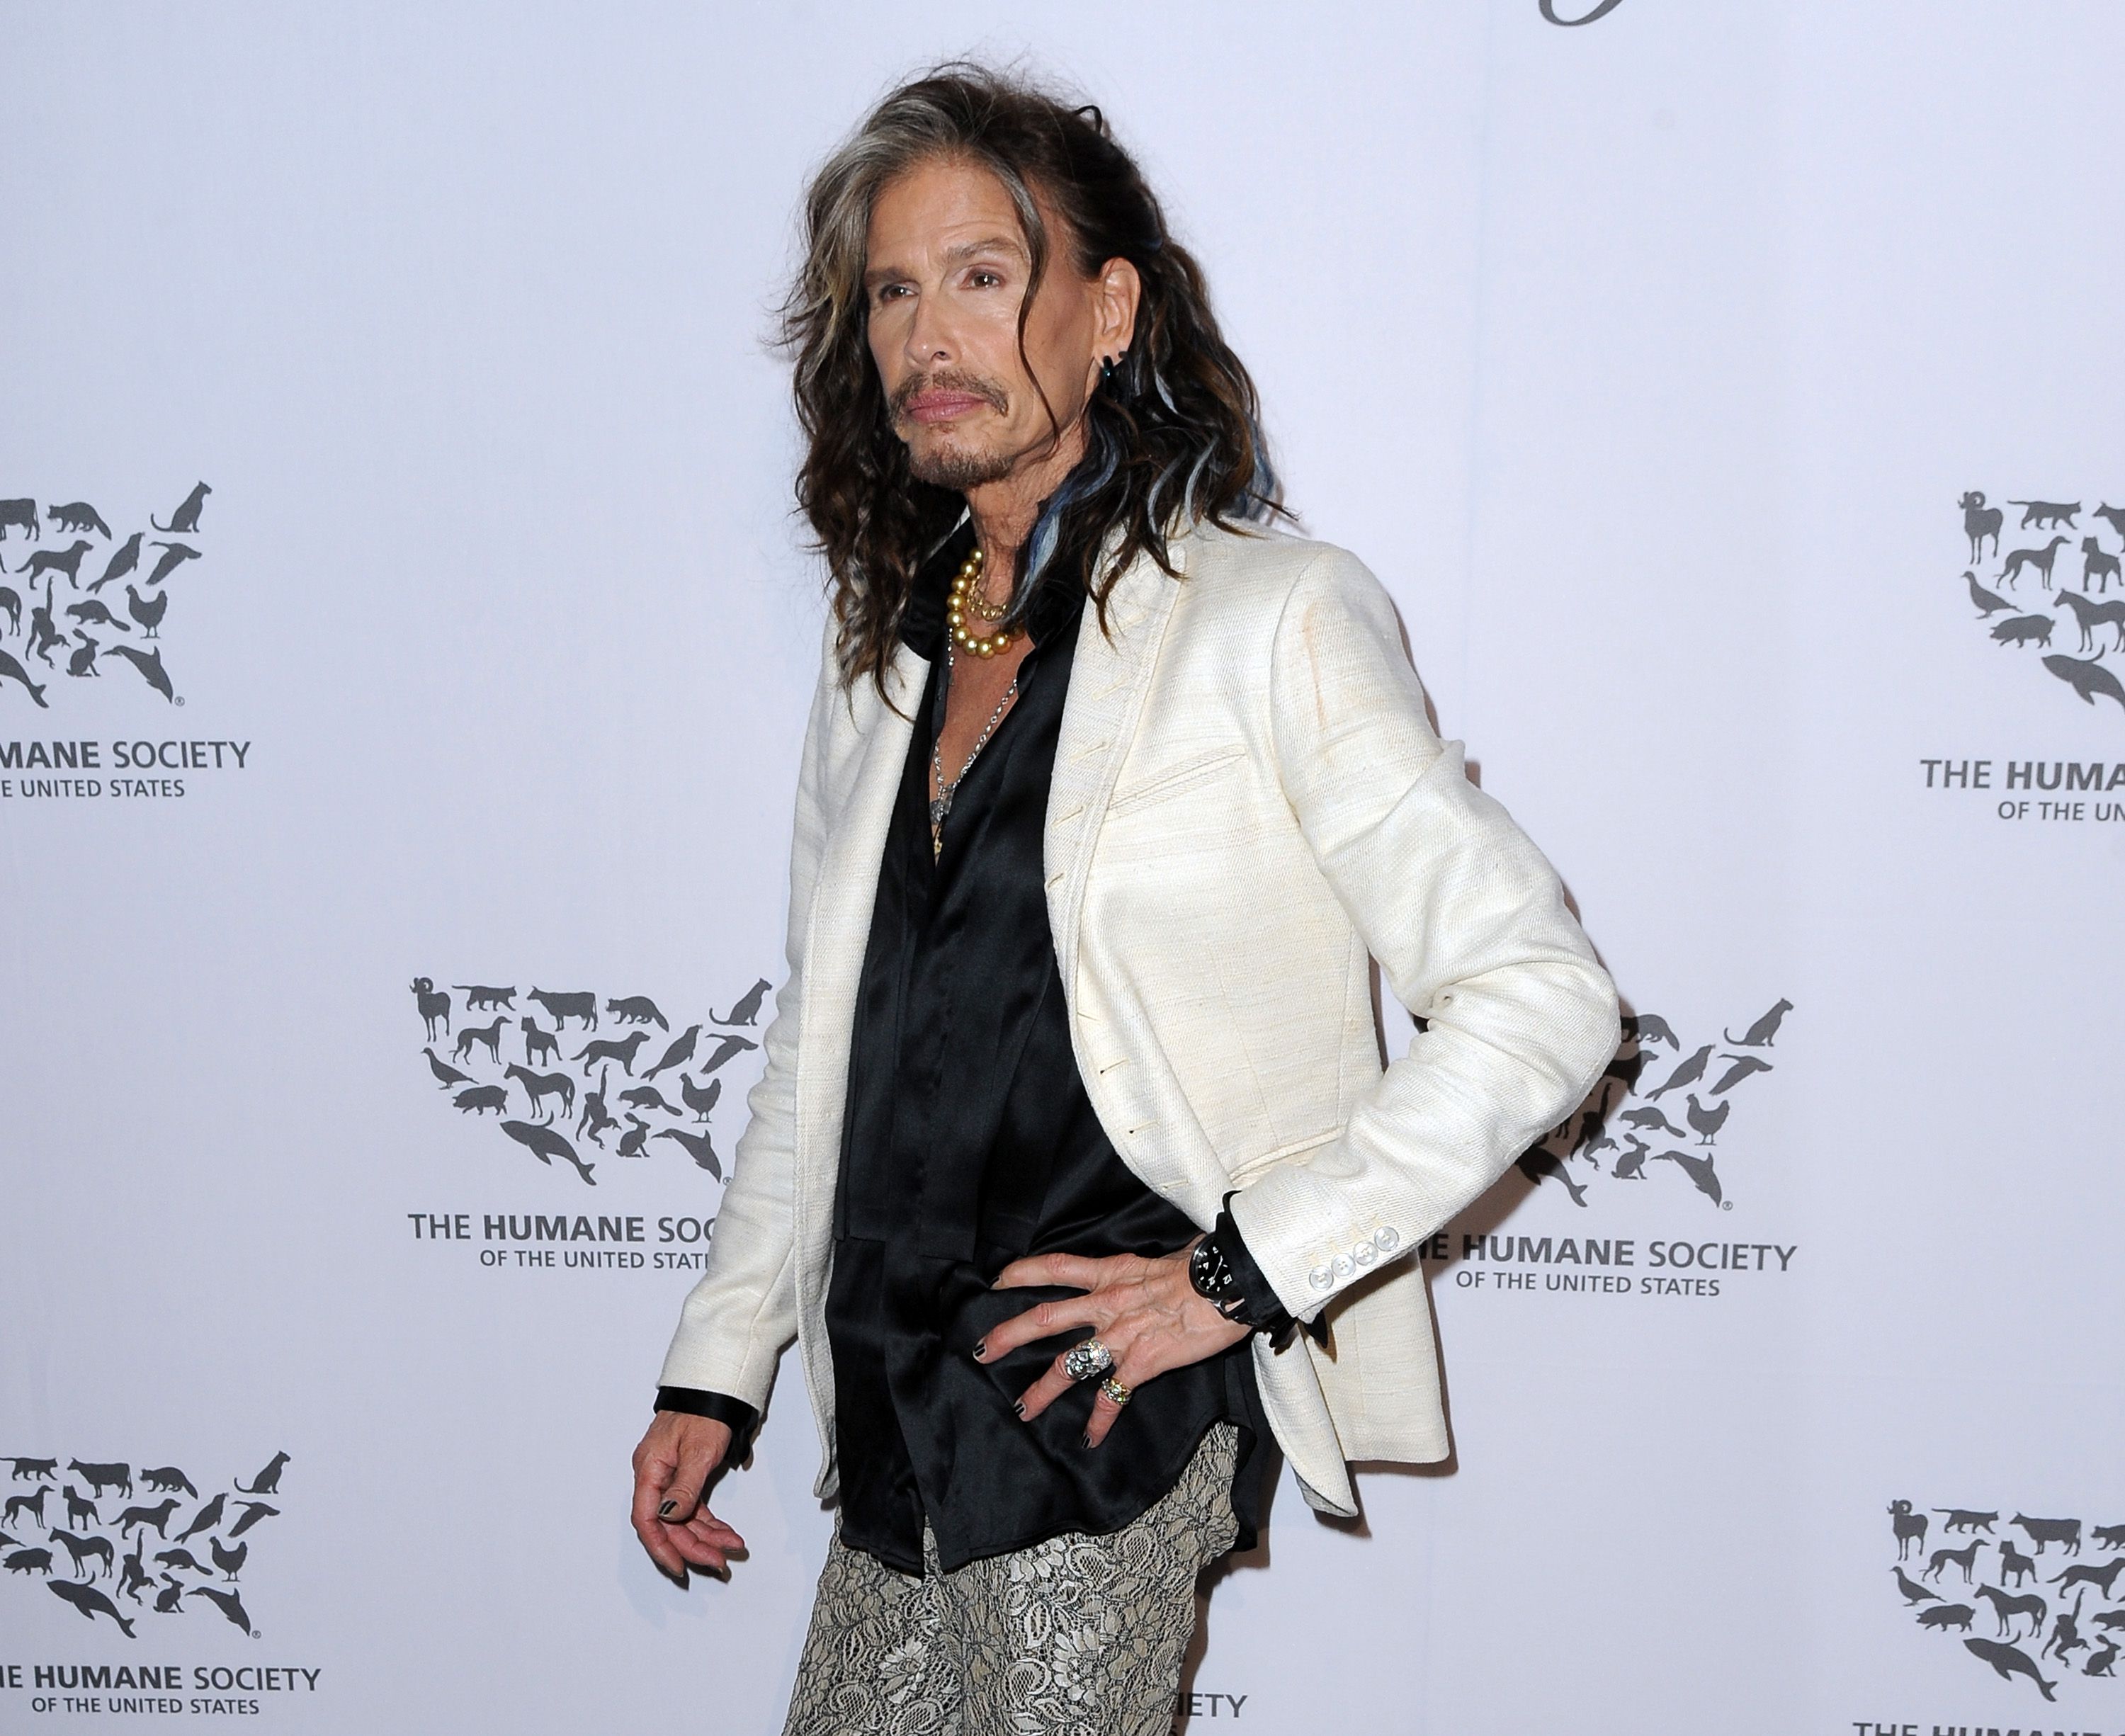 HOLLYWOOD, CA - MAY 07: Musician Steven Tyler attends The Humane Society of the United States' to the Rescue Gala at Paramount Studios on May 7, 2016 in Hollywood, California. (Photo by Angela Weiss/Getty Images for The Humane Society Of The United State )